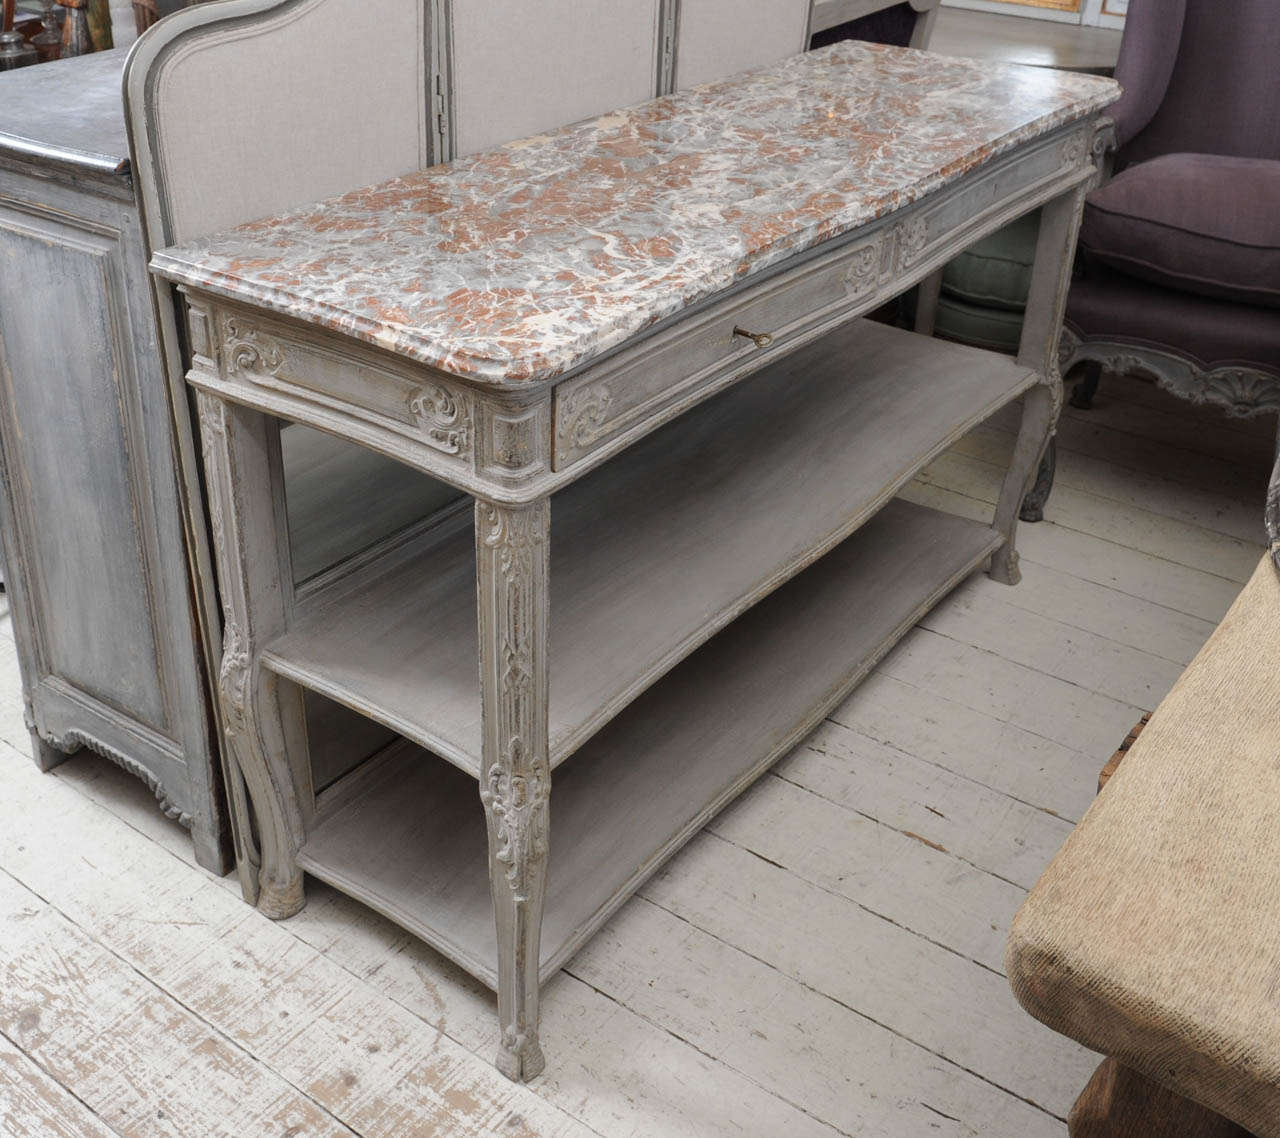 Grey patinated oak buffet with drawers and a marble brown/grey top. On the background a mirror.